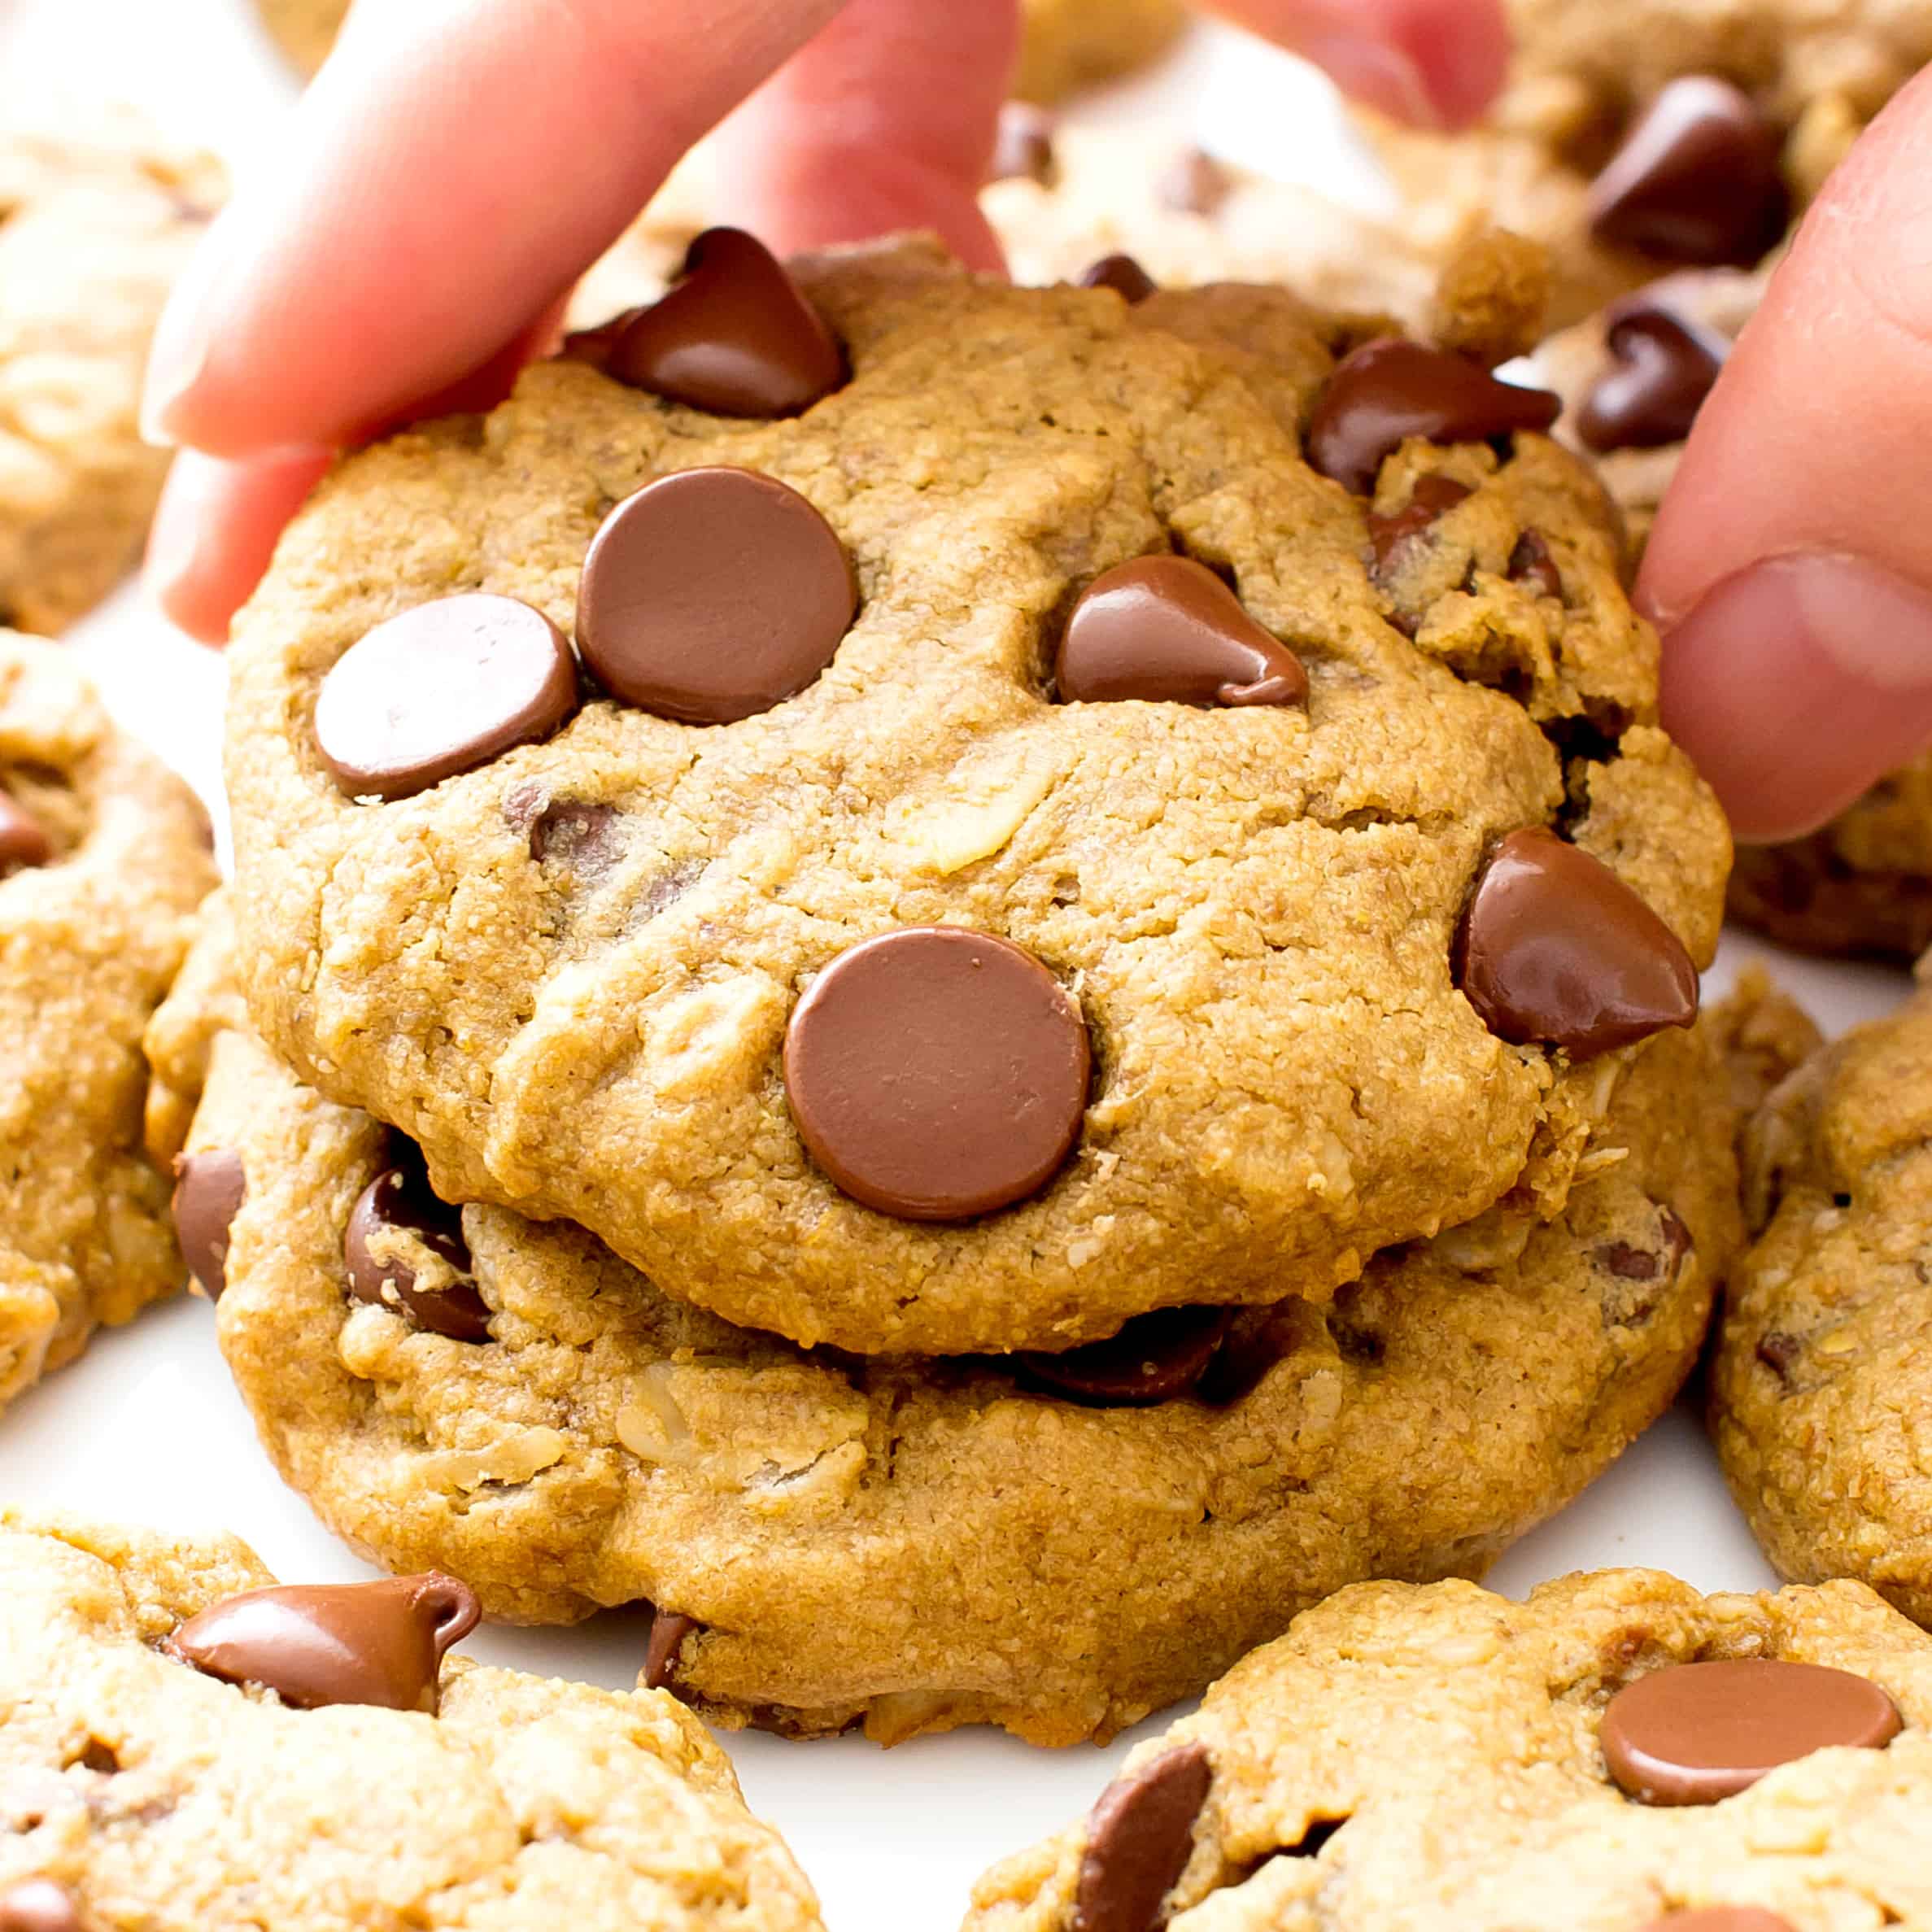 a hand grabbing one soft baked vegan gluten free chocolate chip cookie from a cookie plate